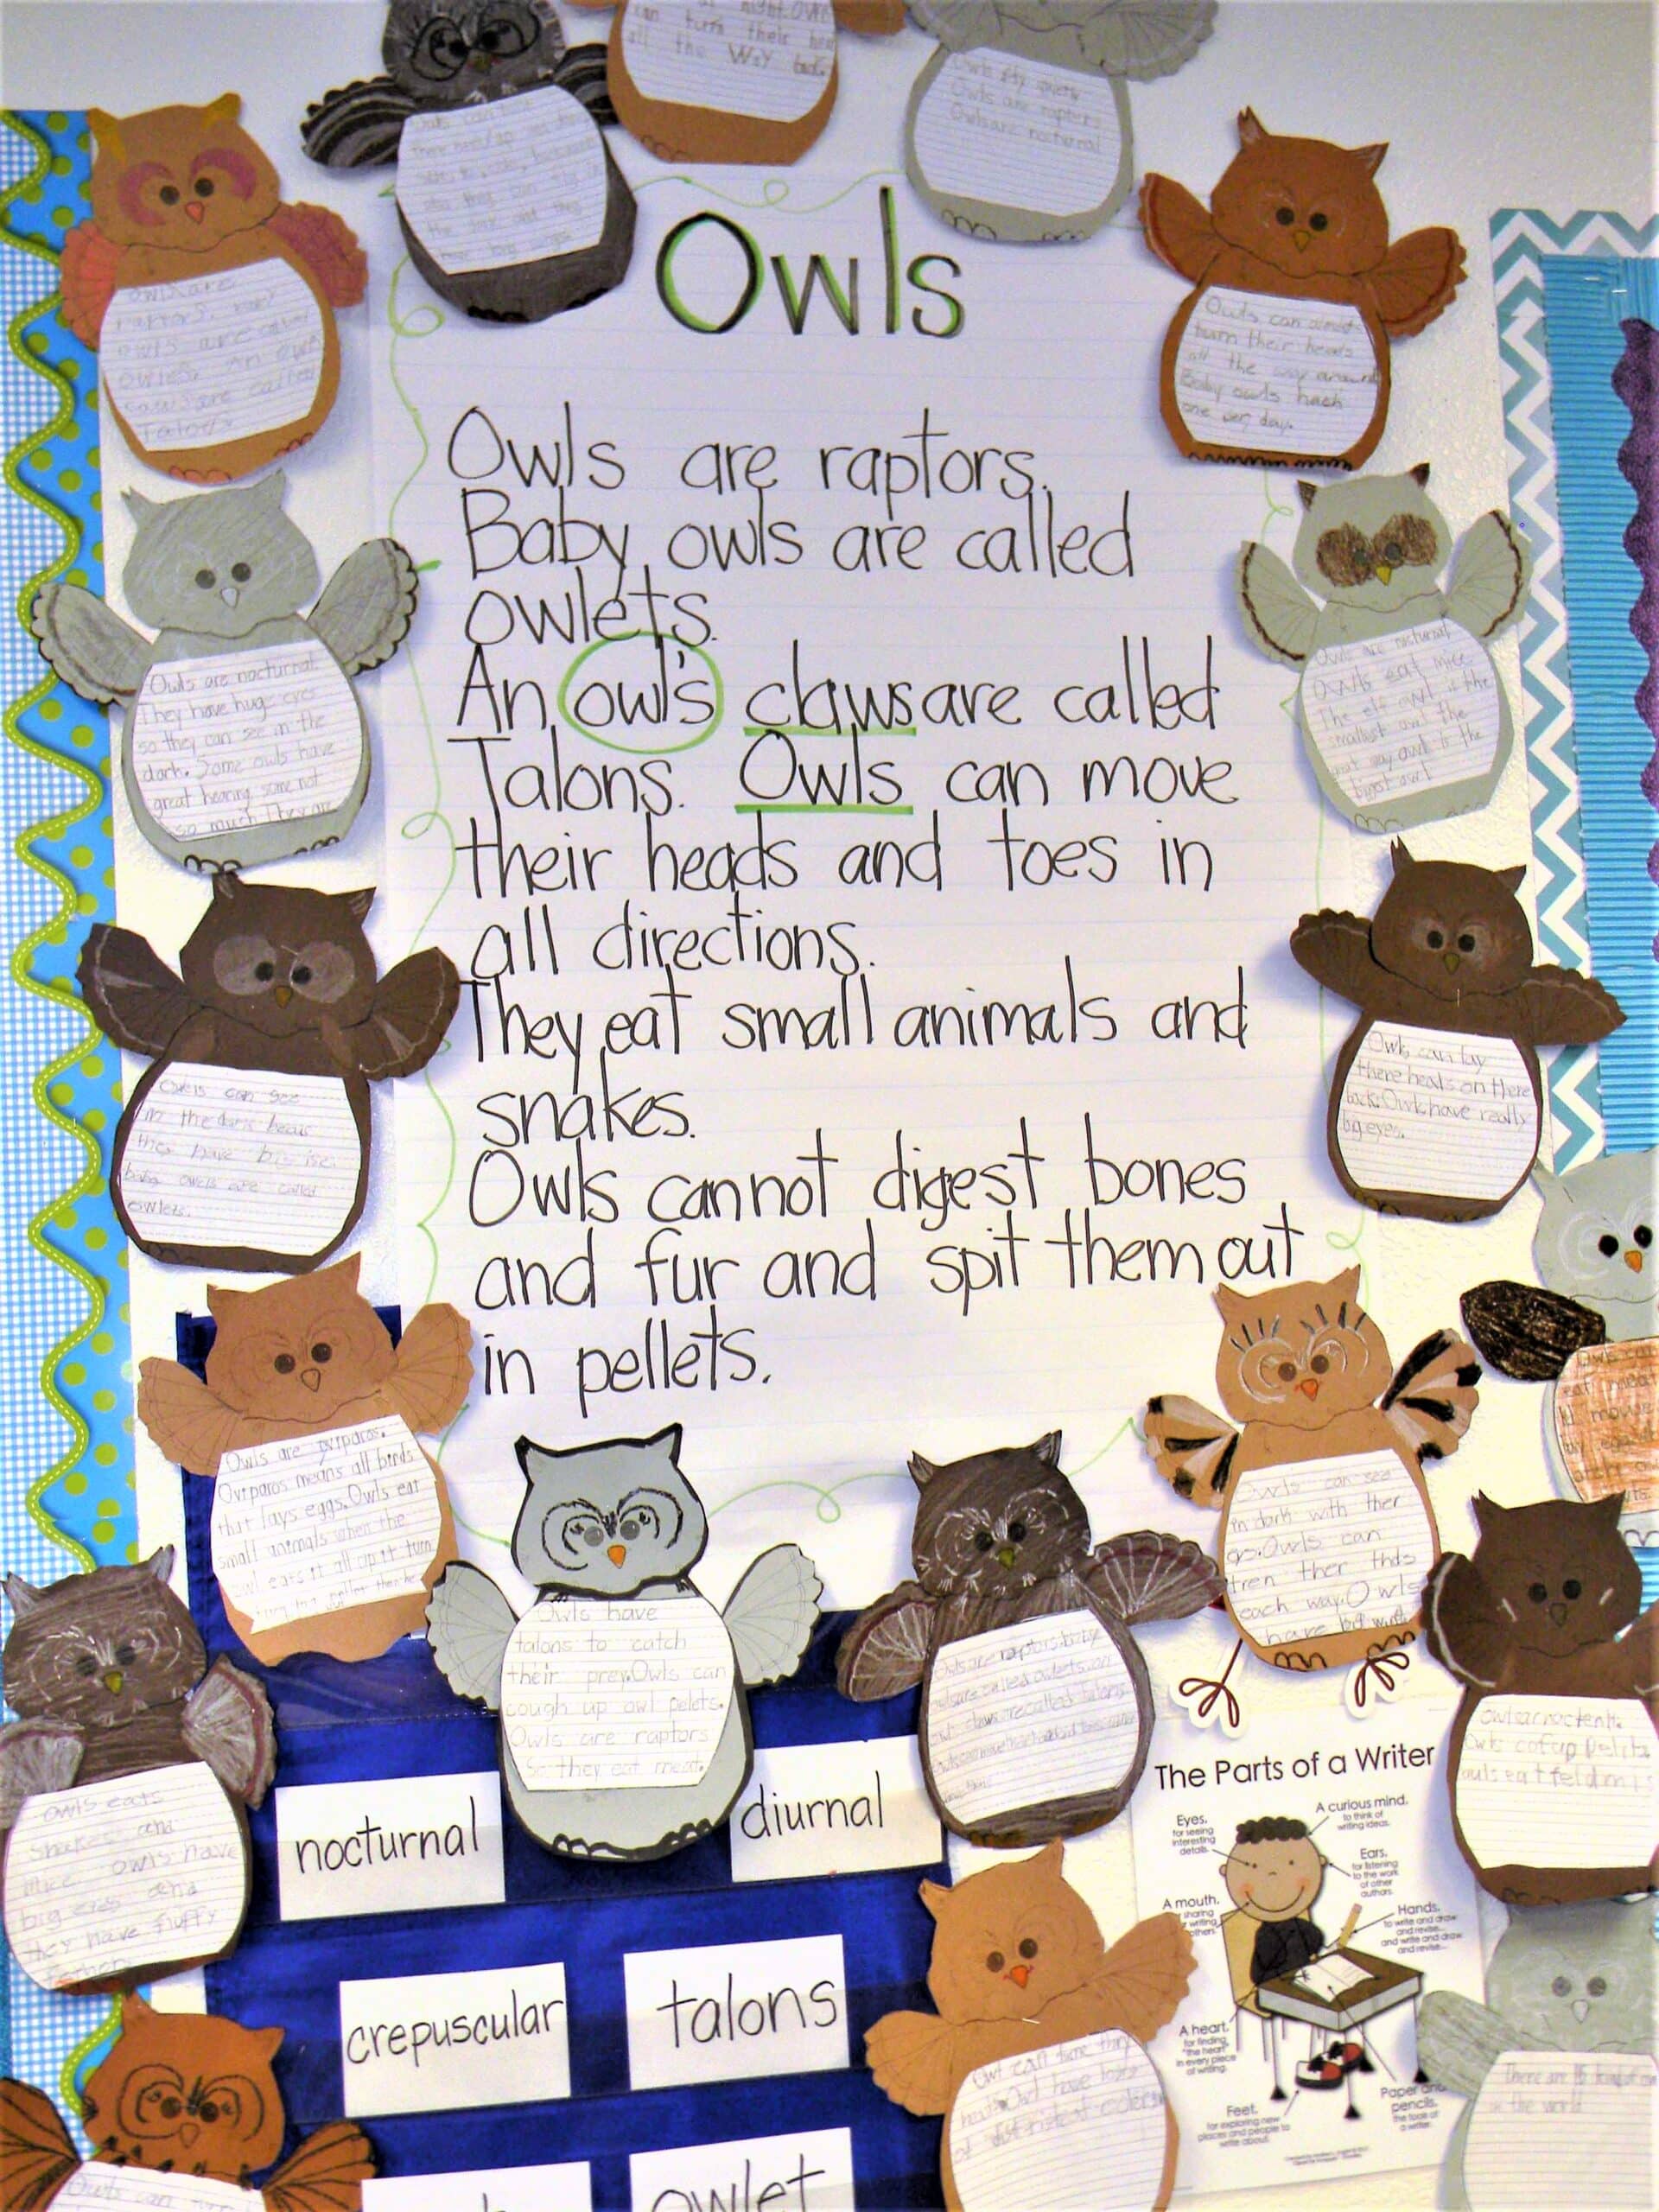 owl facts anchor chart